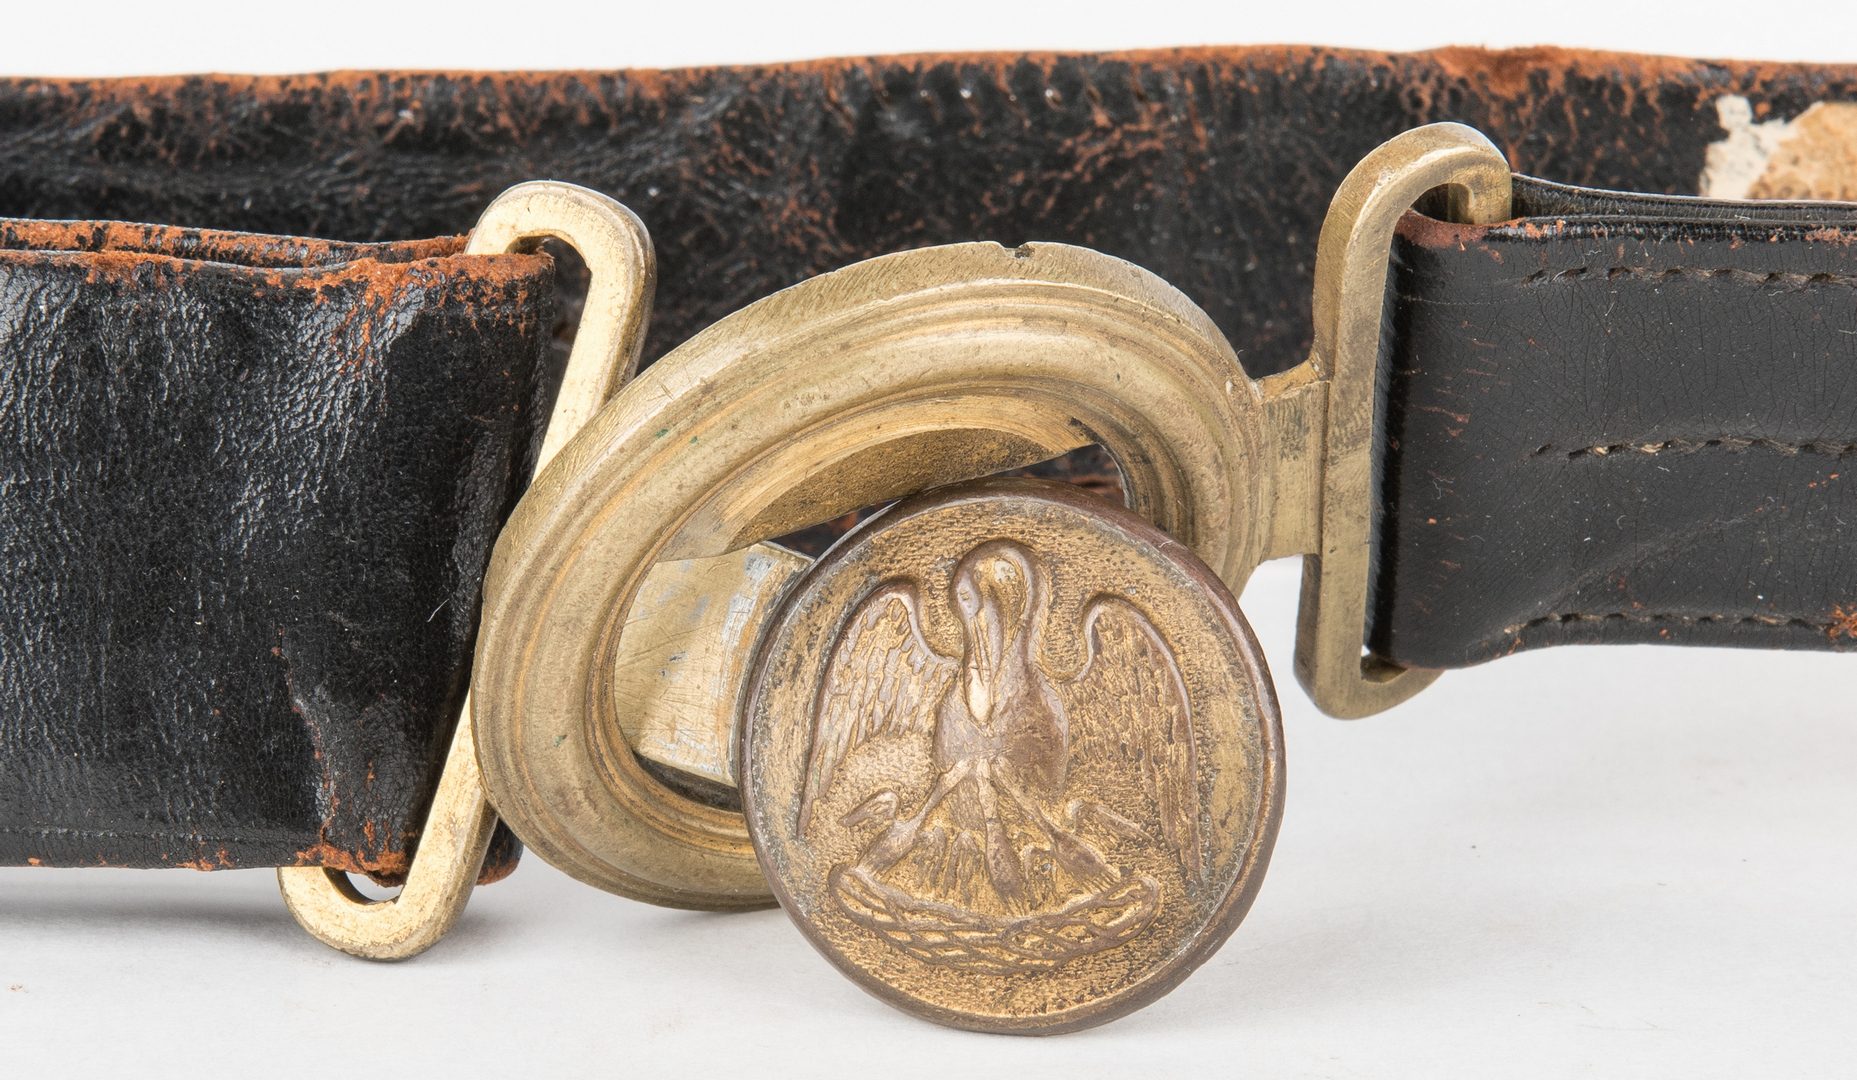 Lot 269: Confederate LA Officer's Sword Belt with Plate on Leather